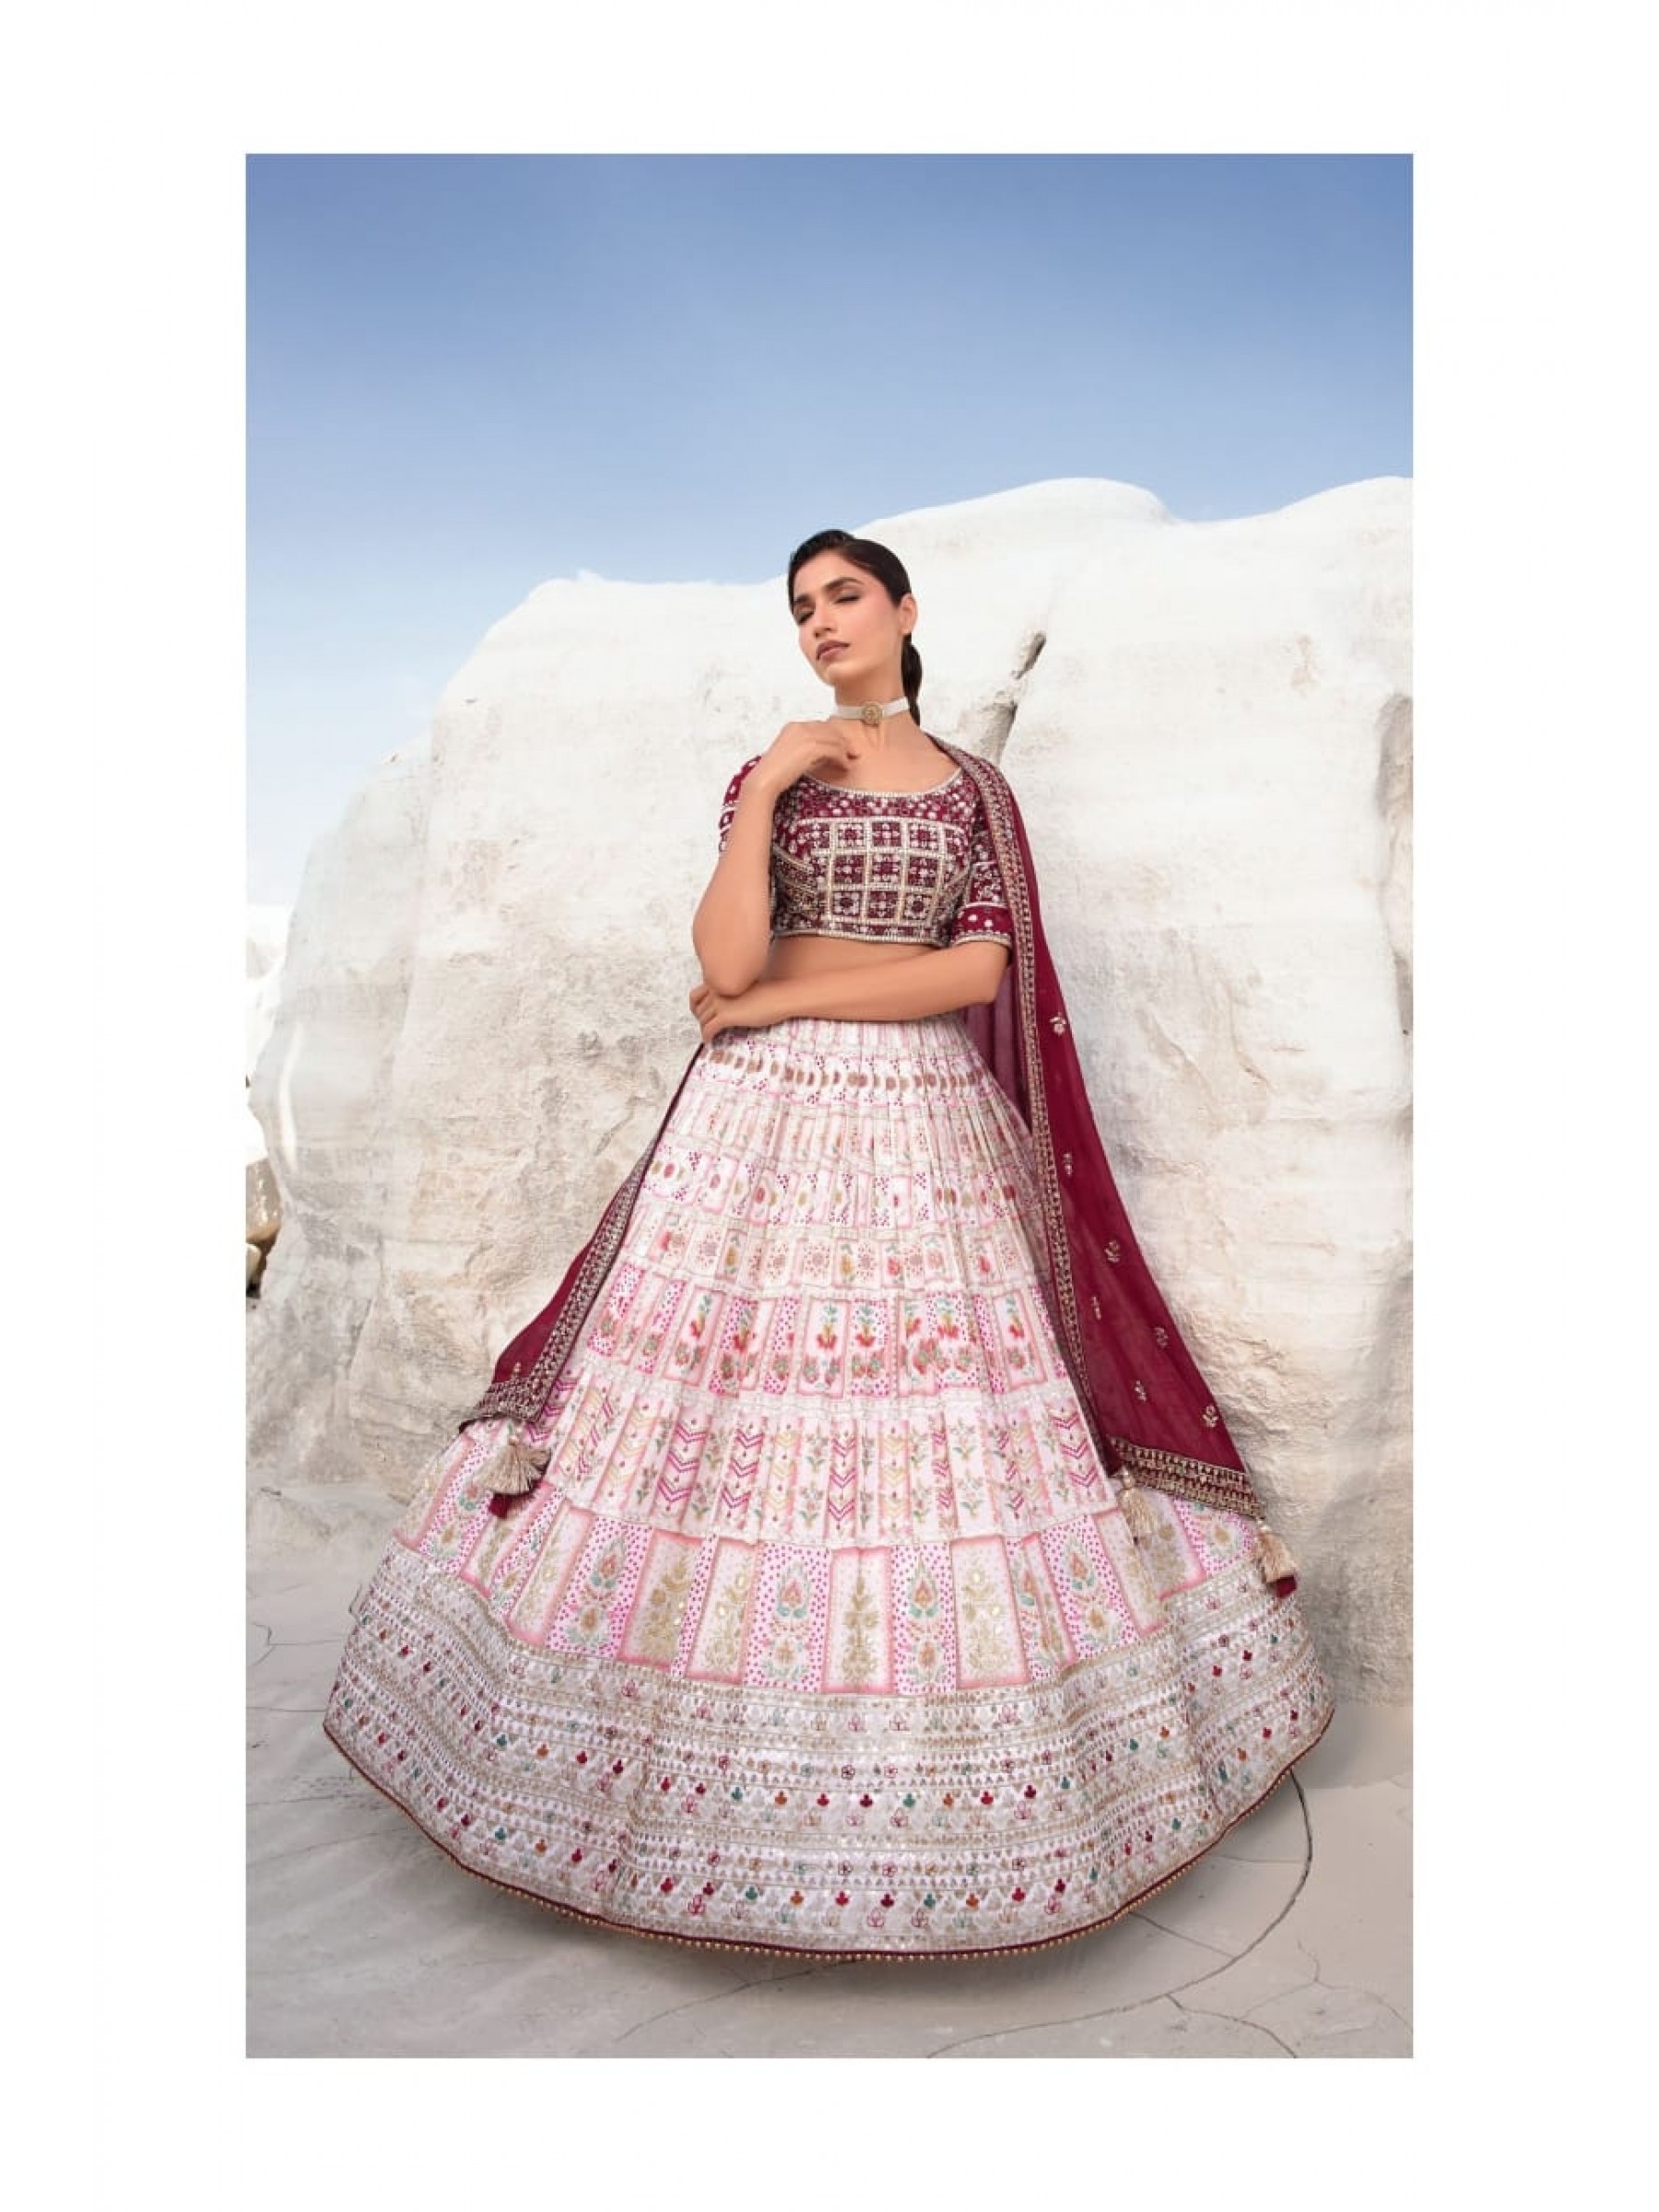 Georgette  Wedding Wear Lehenga In Maroon & White Color  With Embroidery Work